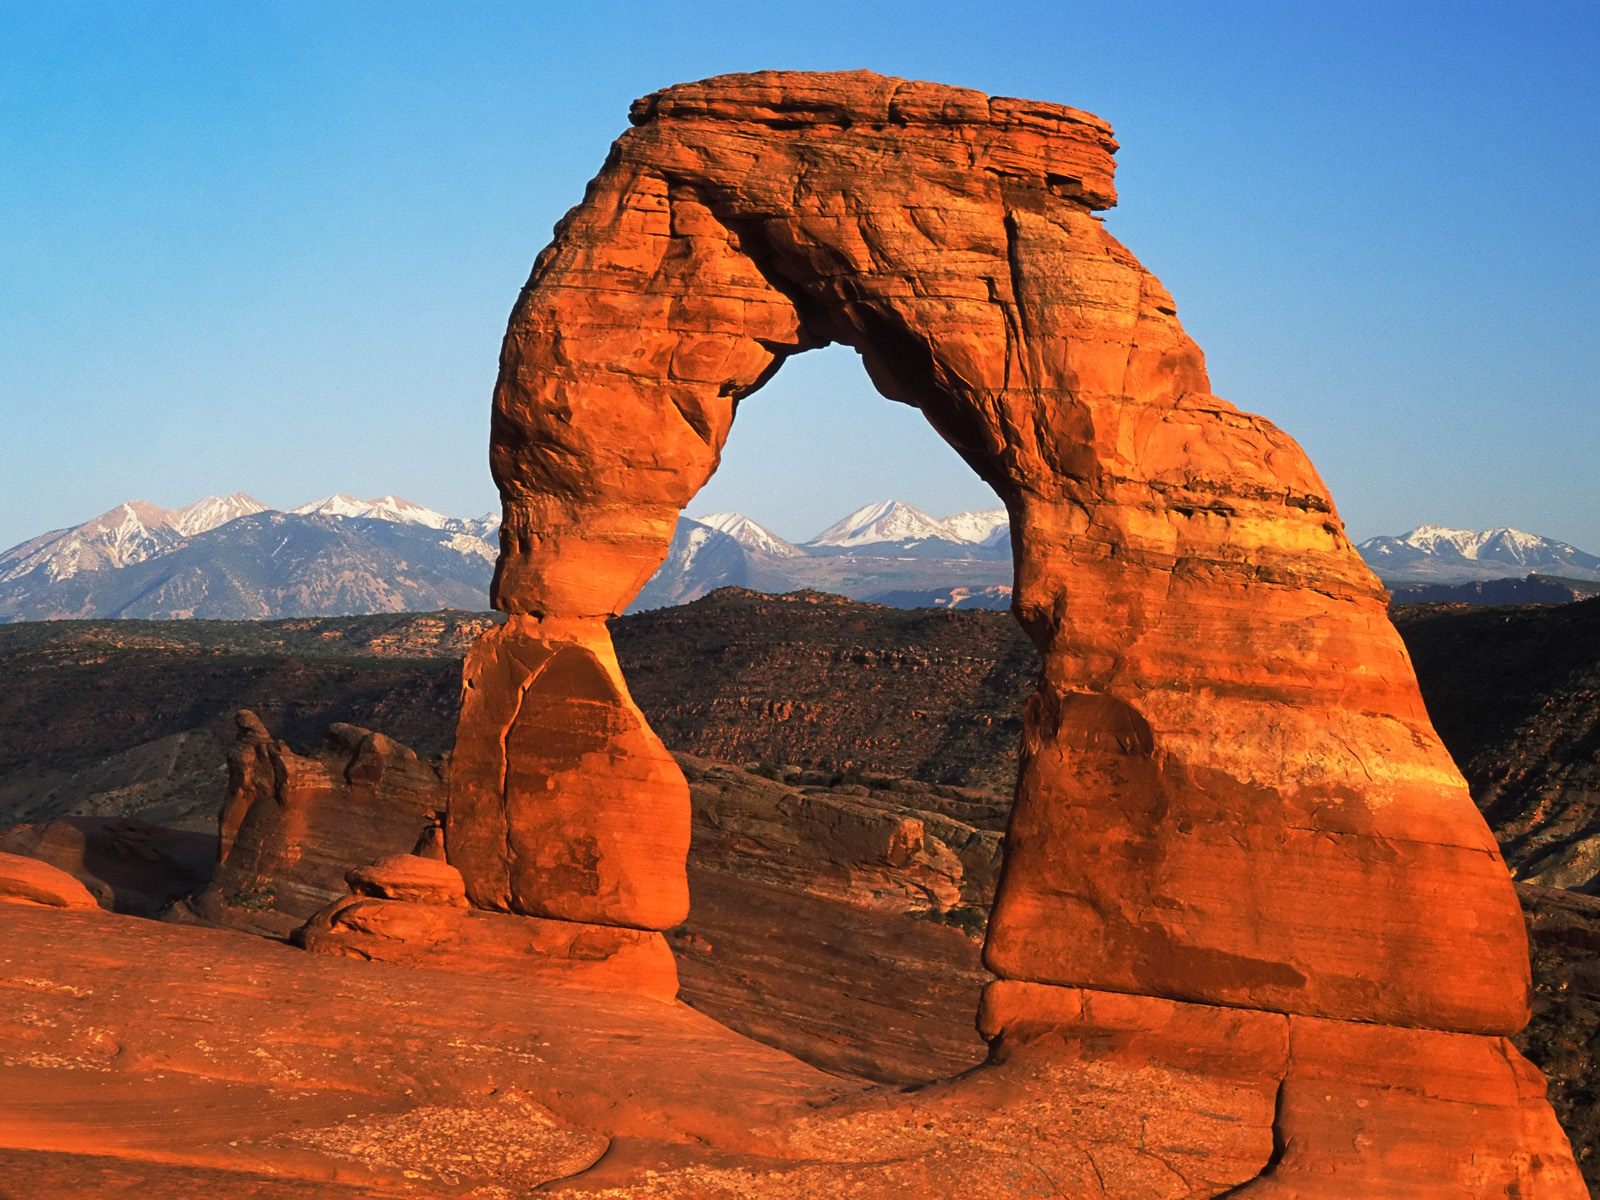 http://fruitfly.files.wordpress.com/2008/11/delicate-arch-arches-national-park-utah.jpg